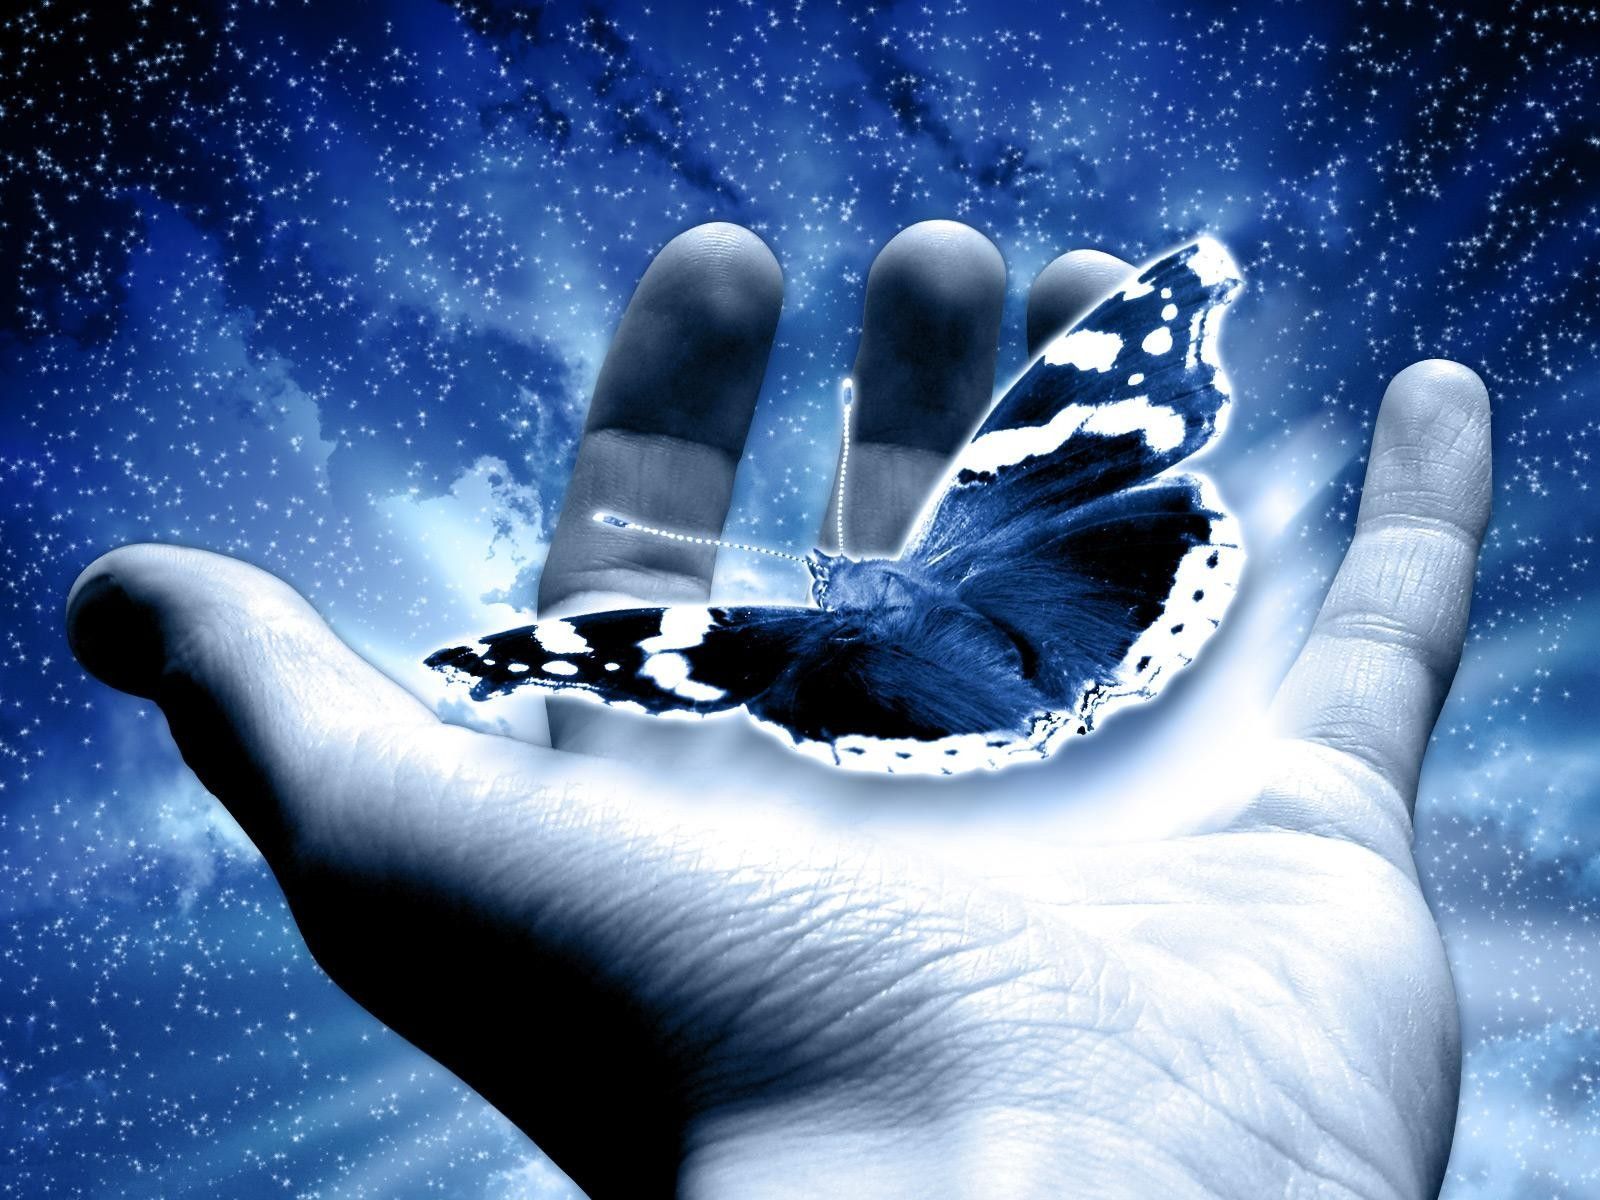 Download holding-a-butterfly-wallpaper.jpg6 Free By udhao.net